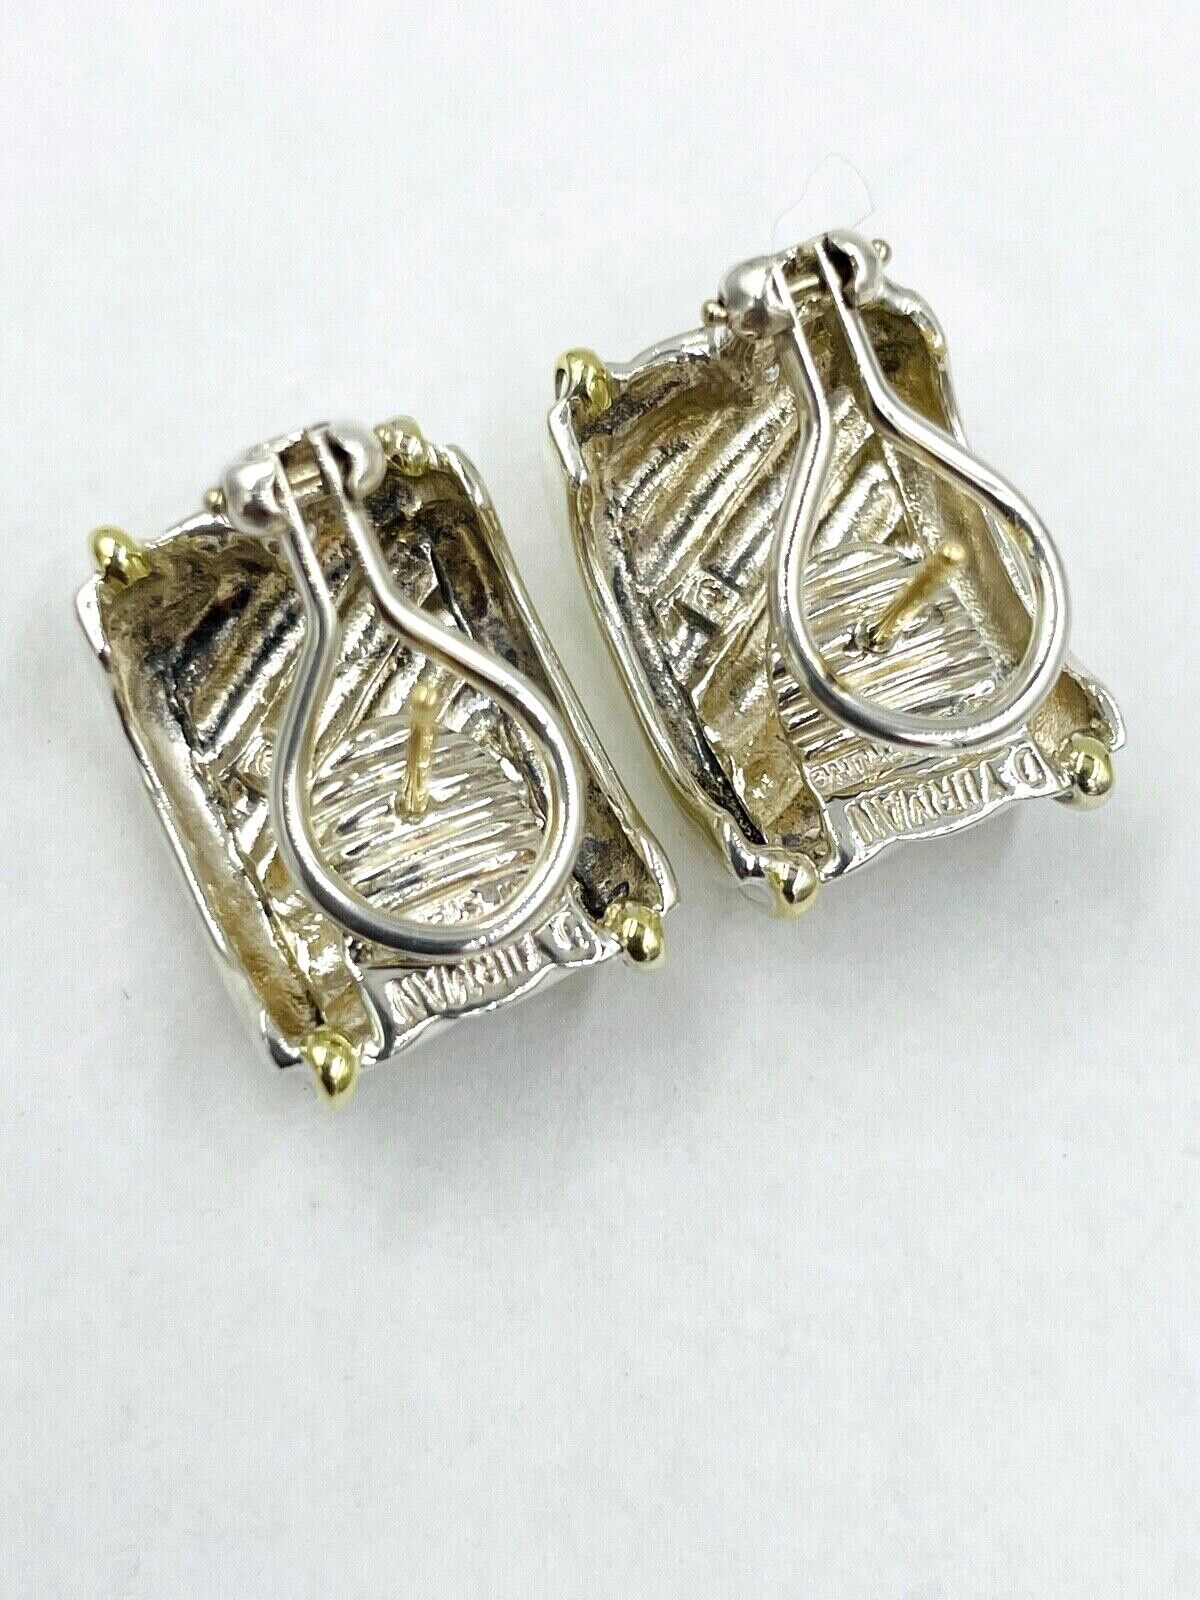 DAVID YURMAN STERLING SILVER 14K YELLOW GOLD THOROUGHBRED CABLE CIGAR EARRINGS